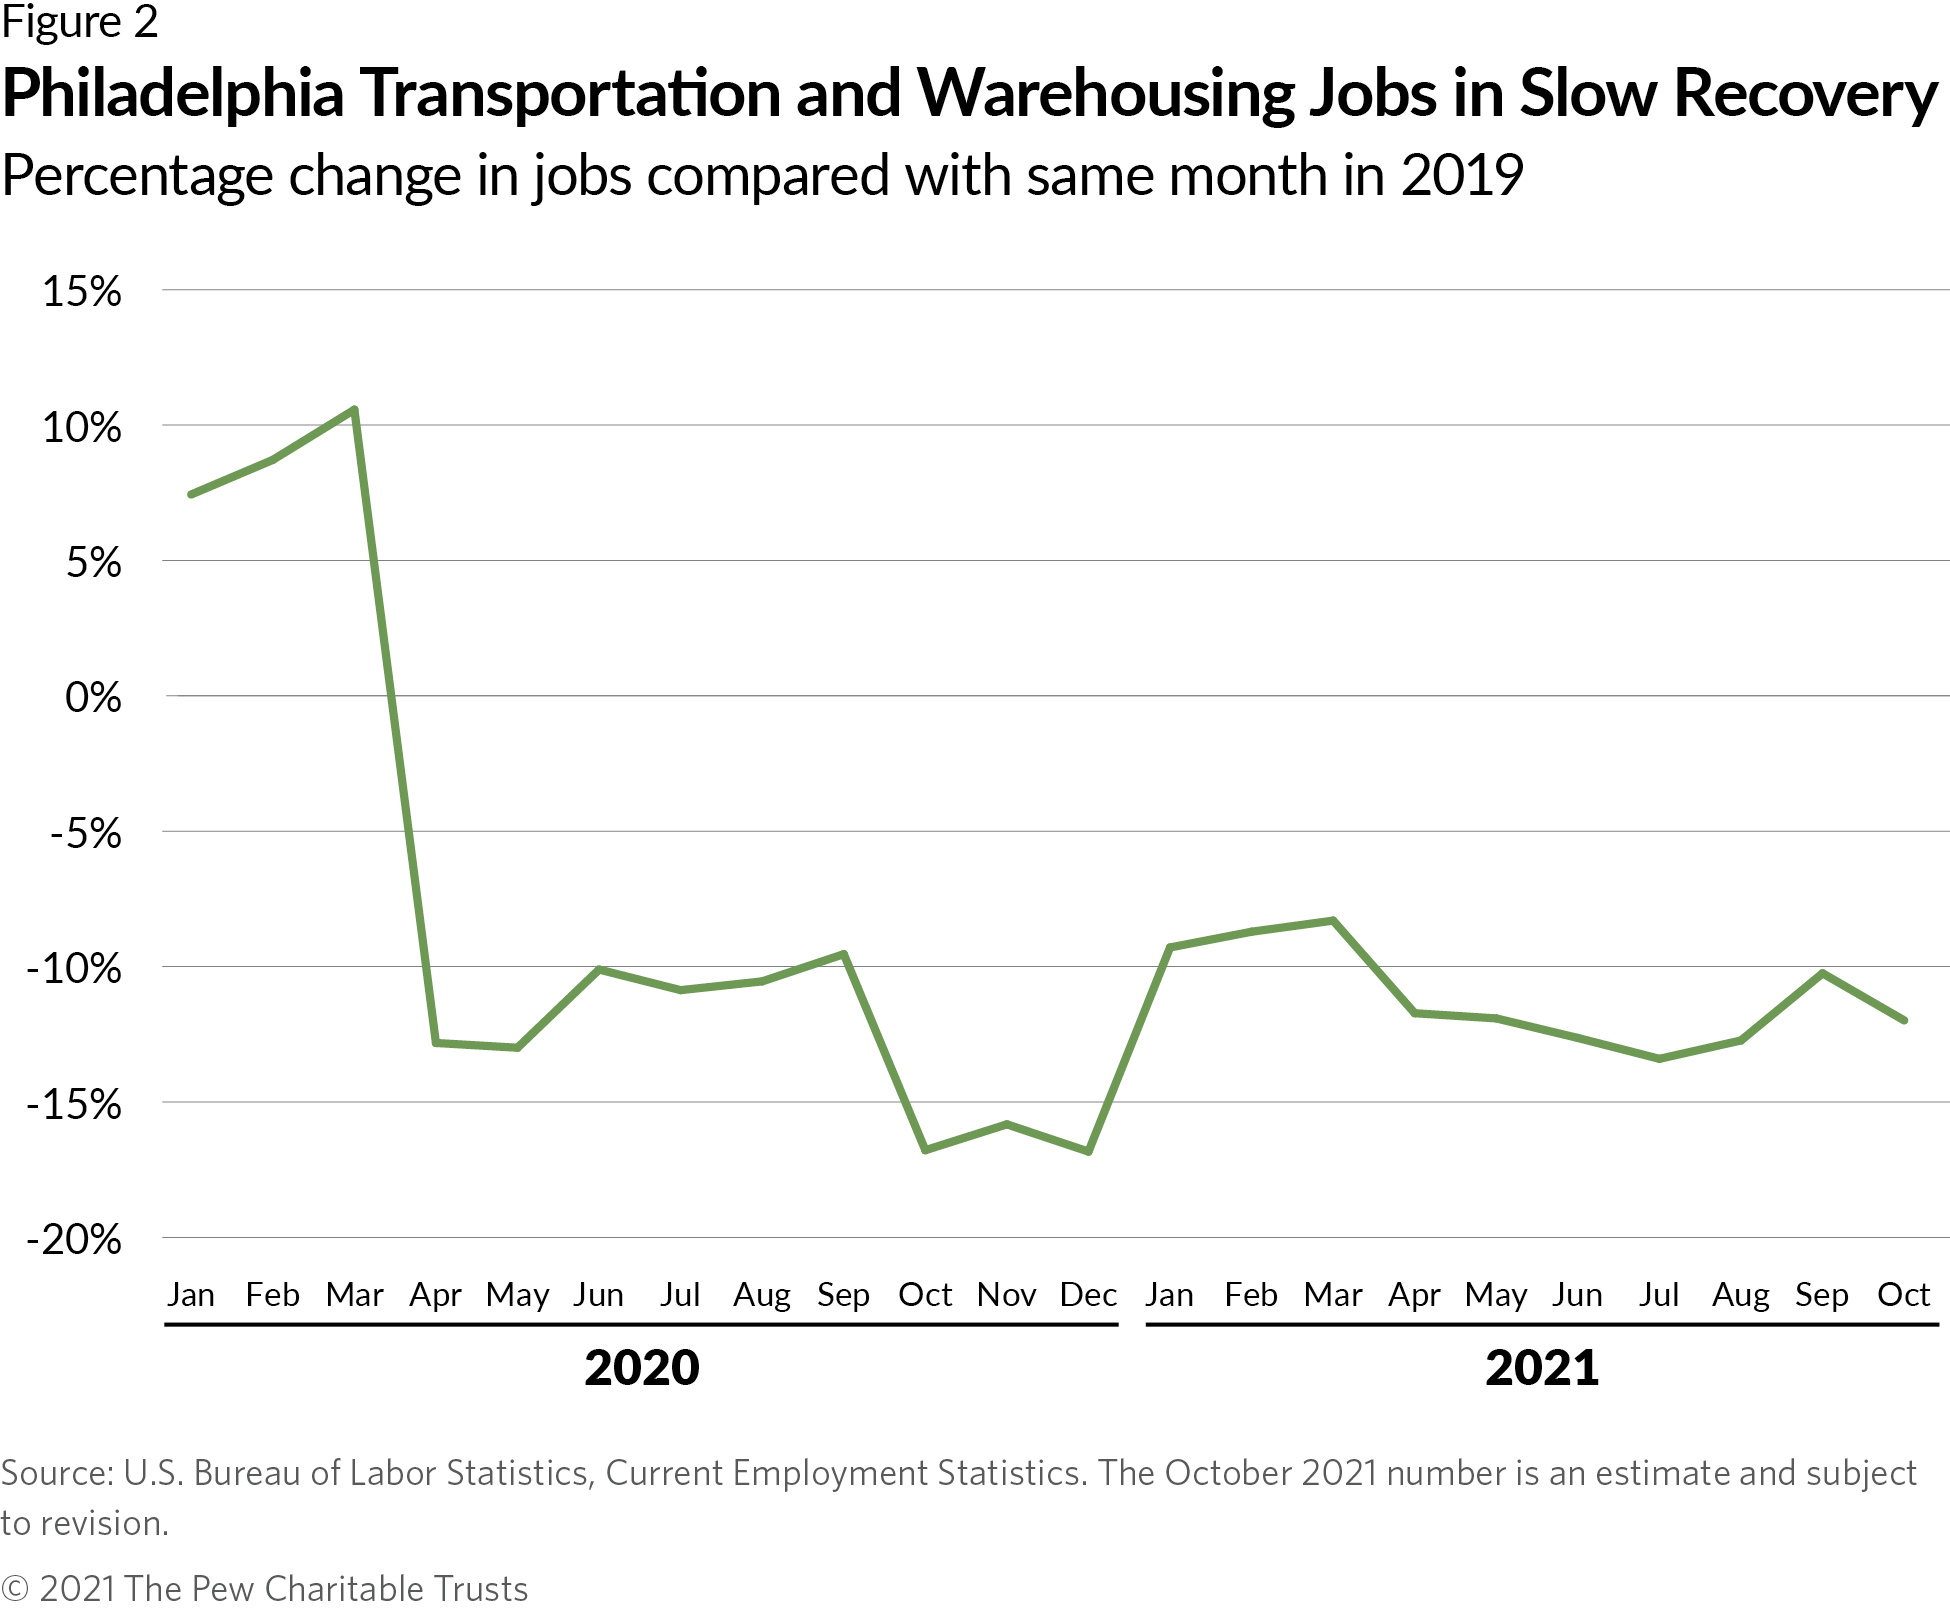 Philadelphia Transportation and Warehousing Jobs in Slow Recovery. Percentage change in jobs compared with same month in 2019.